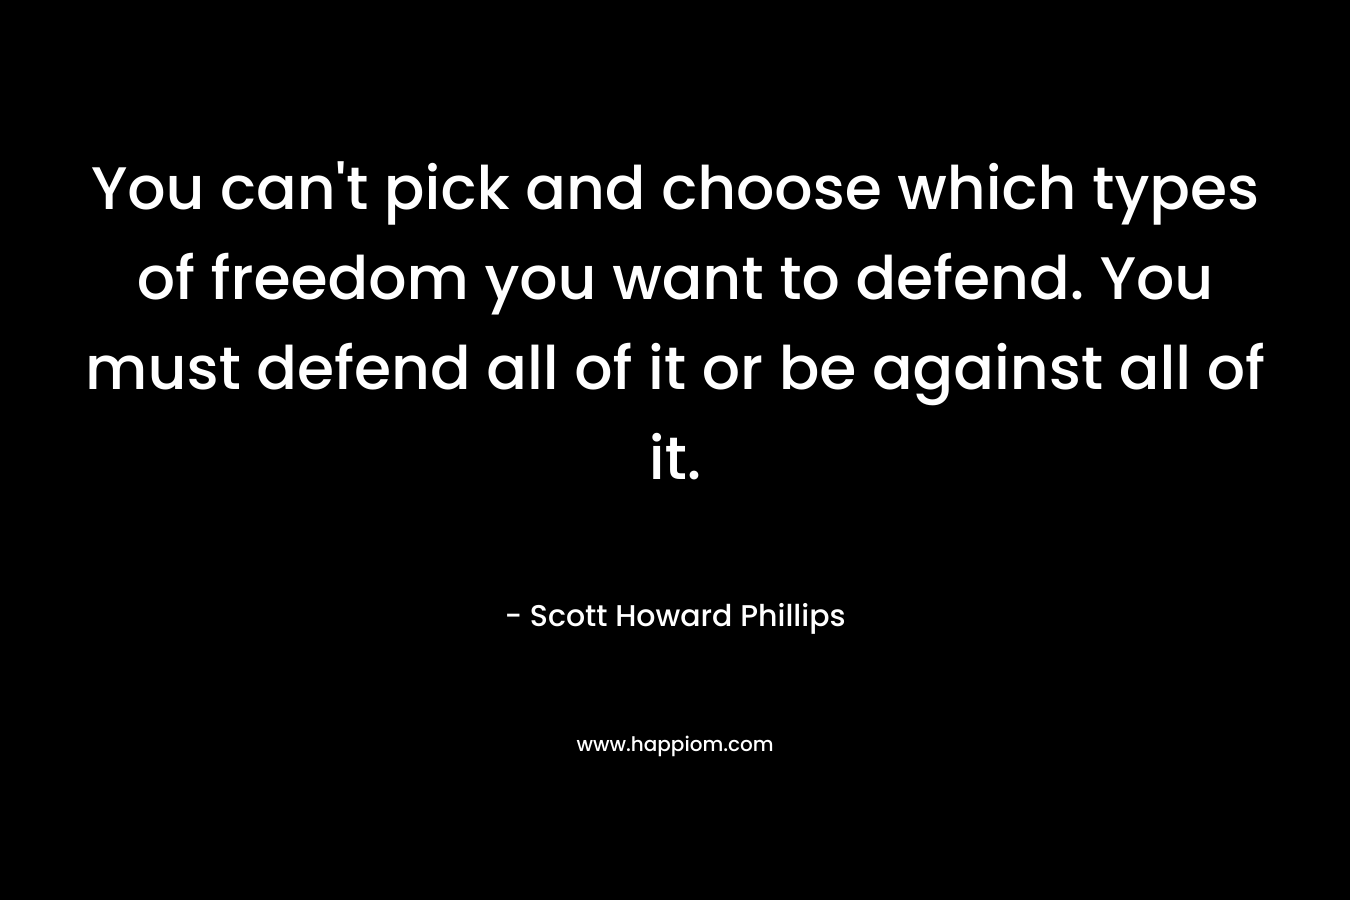 You can’t pick and choose which types of freedom you want to defend. You must defend all of it or be against all of it. – Scott Howard Phillips